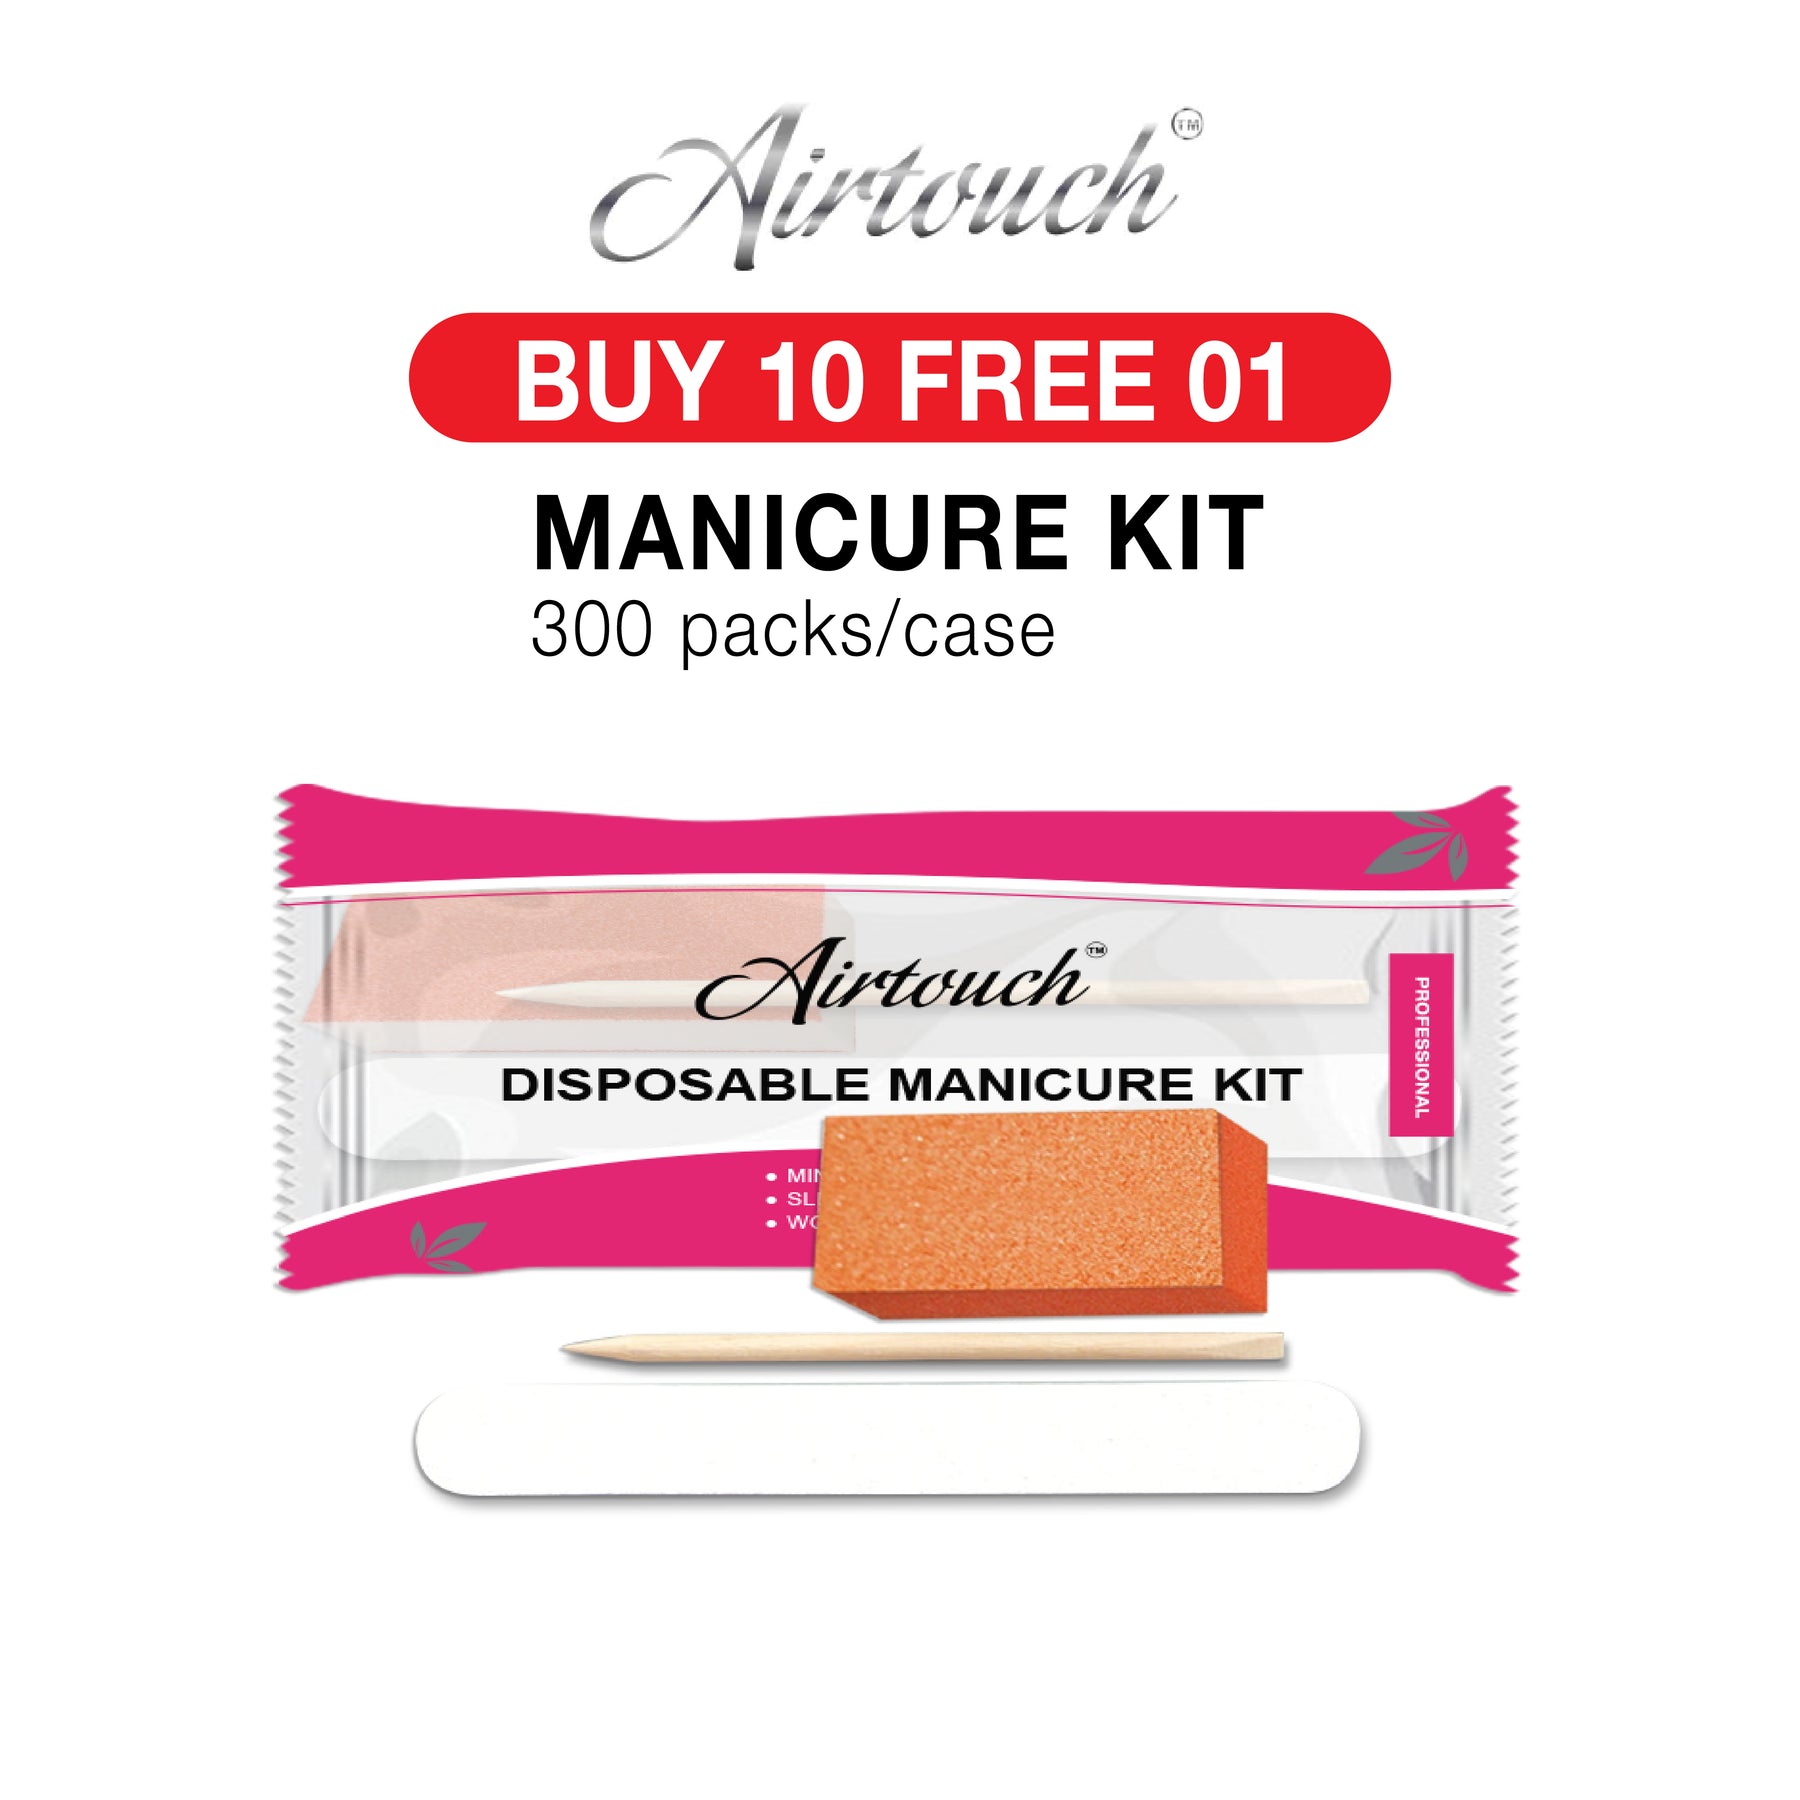 Airtouch Disposable Manicure Kit, 19339, CASE (PK: 300sets/case). Buy 10 Get 01 Free